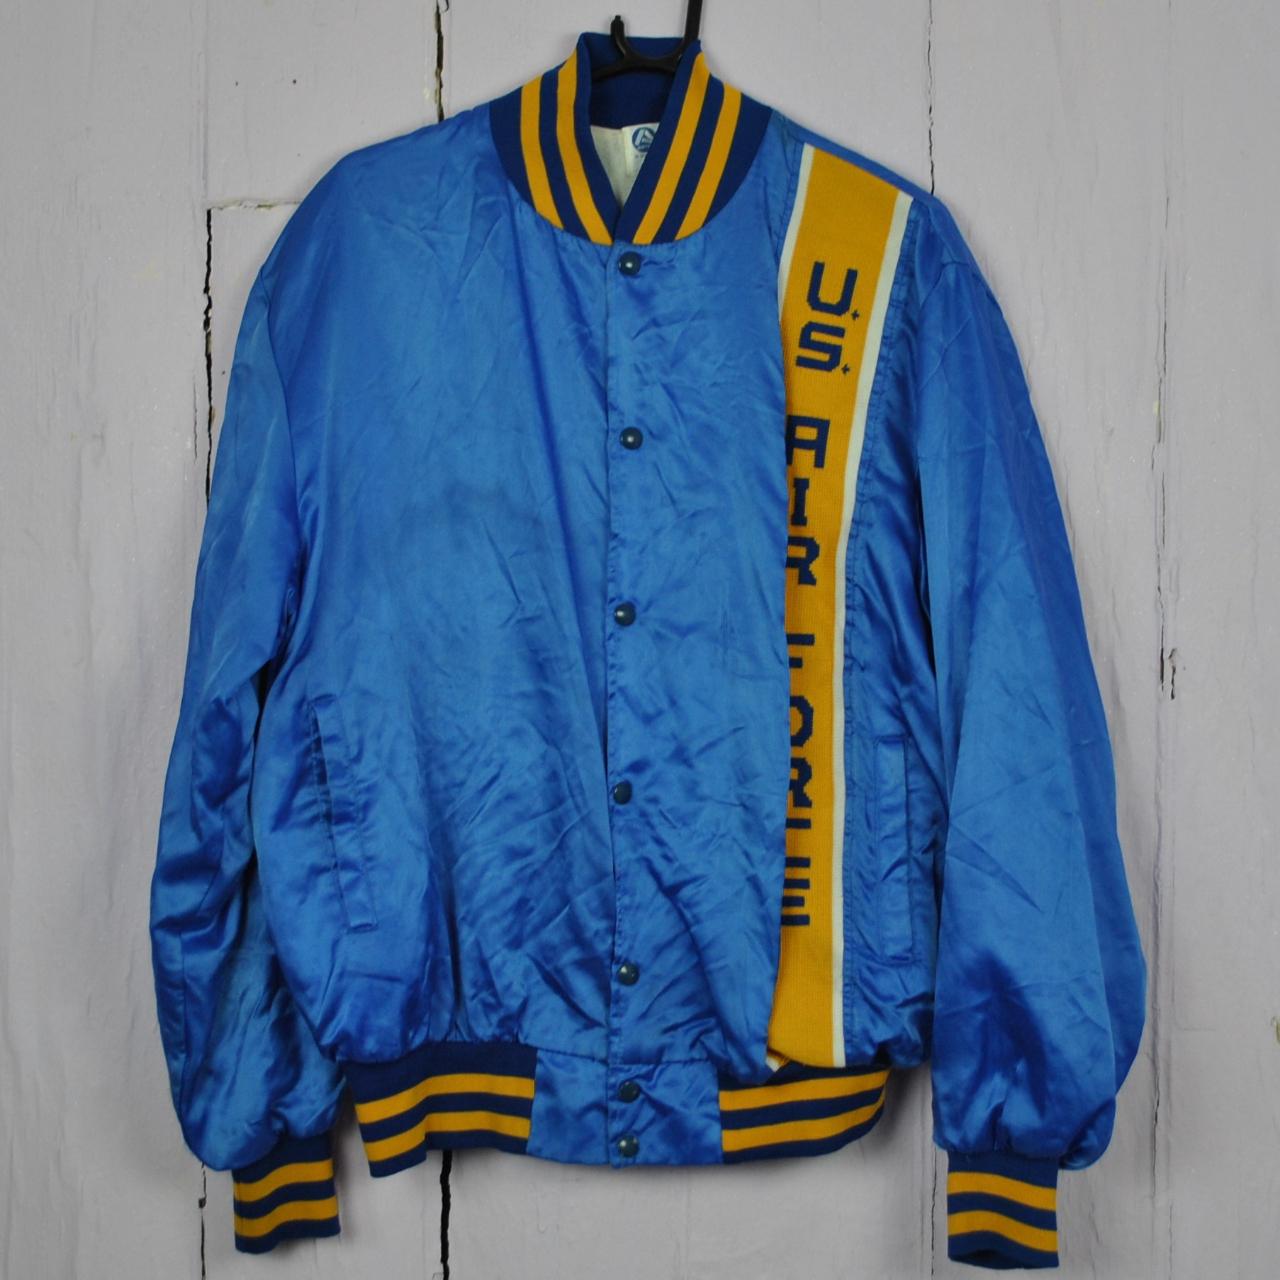 Really nice US air force bomber jacket in a... - Depop